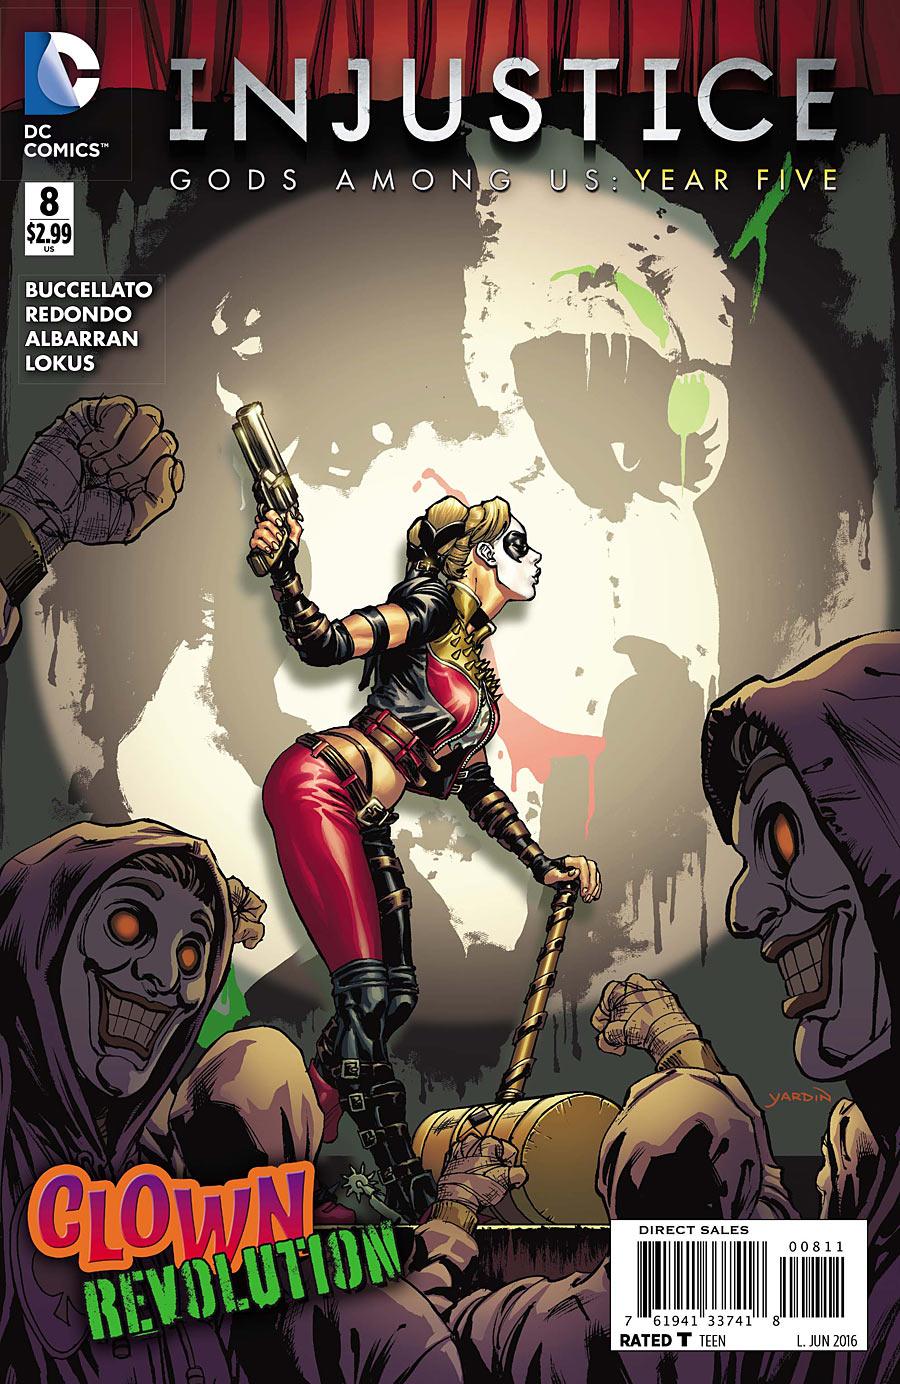 Injustice: Gods Among Us: Year Five Vol. 1 #8